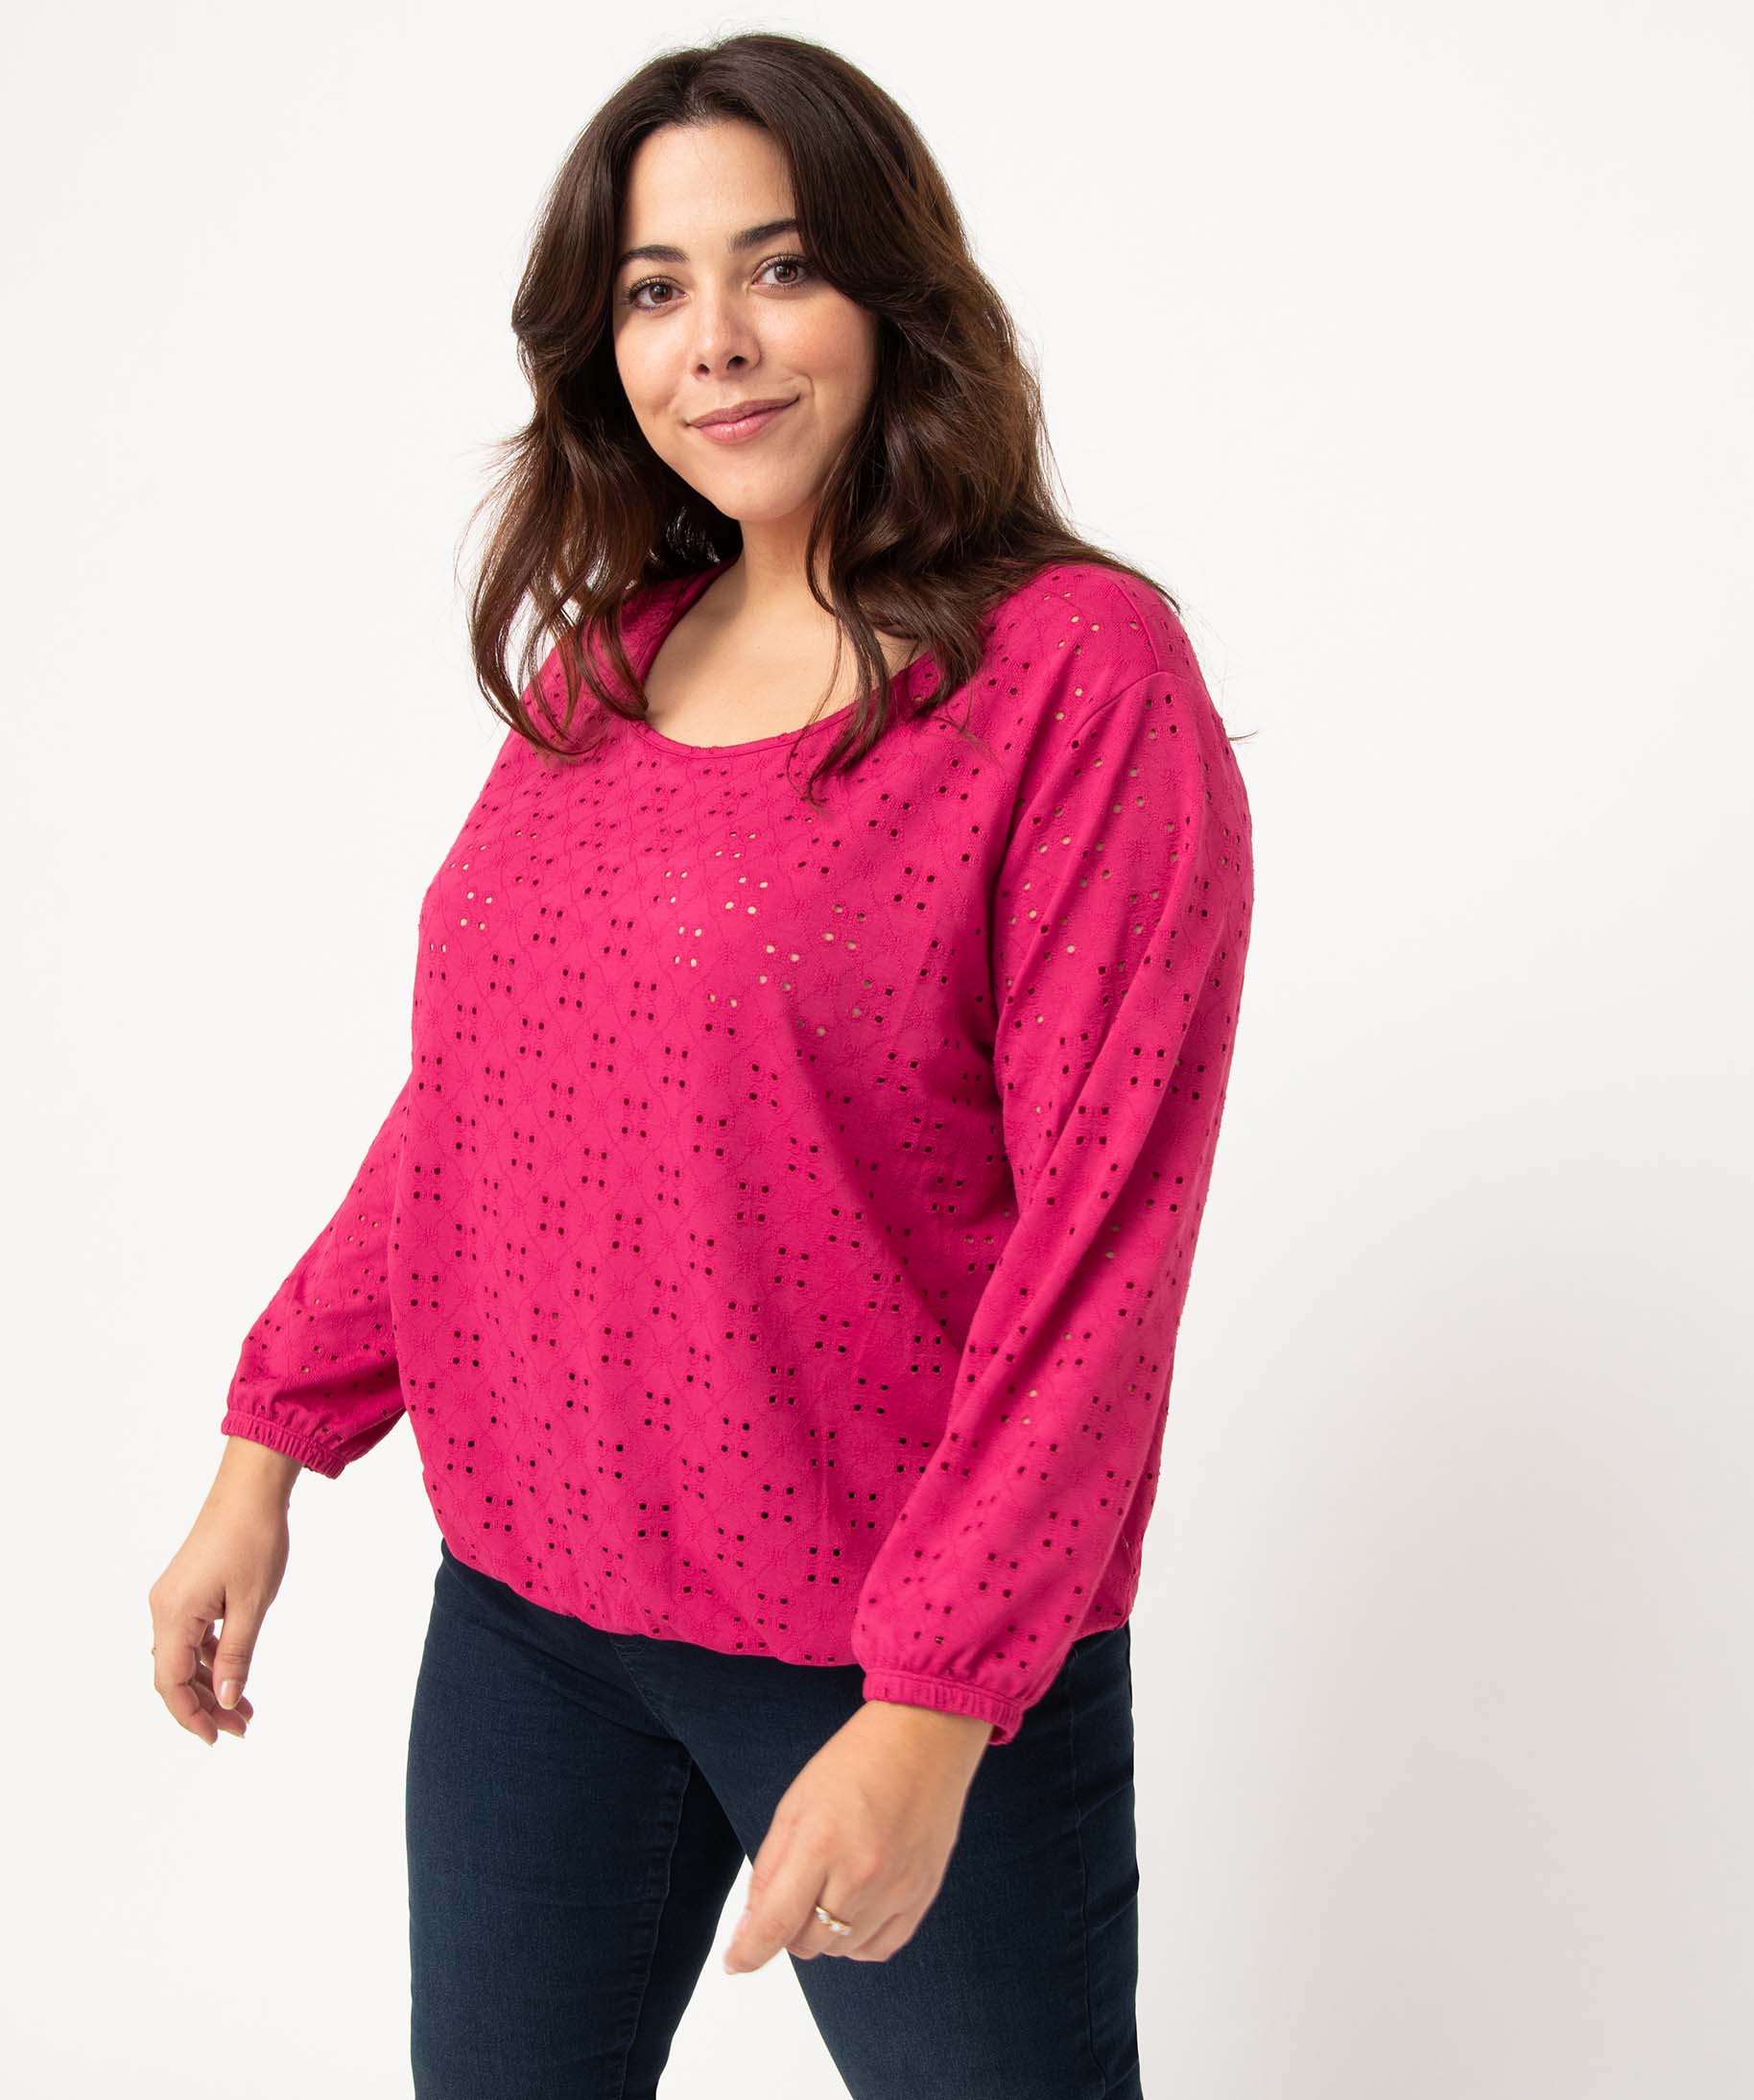 tee-shirt femme grande taille ajoure a manches 34 rose